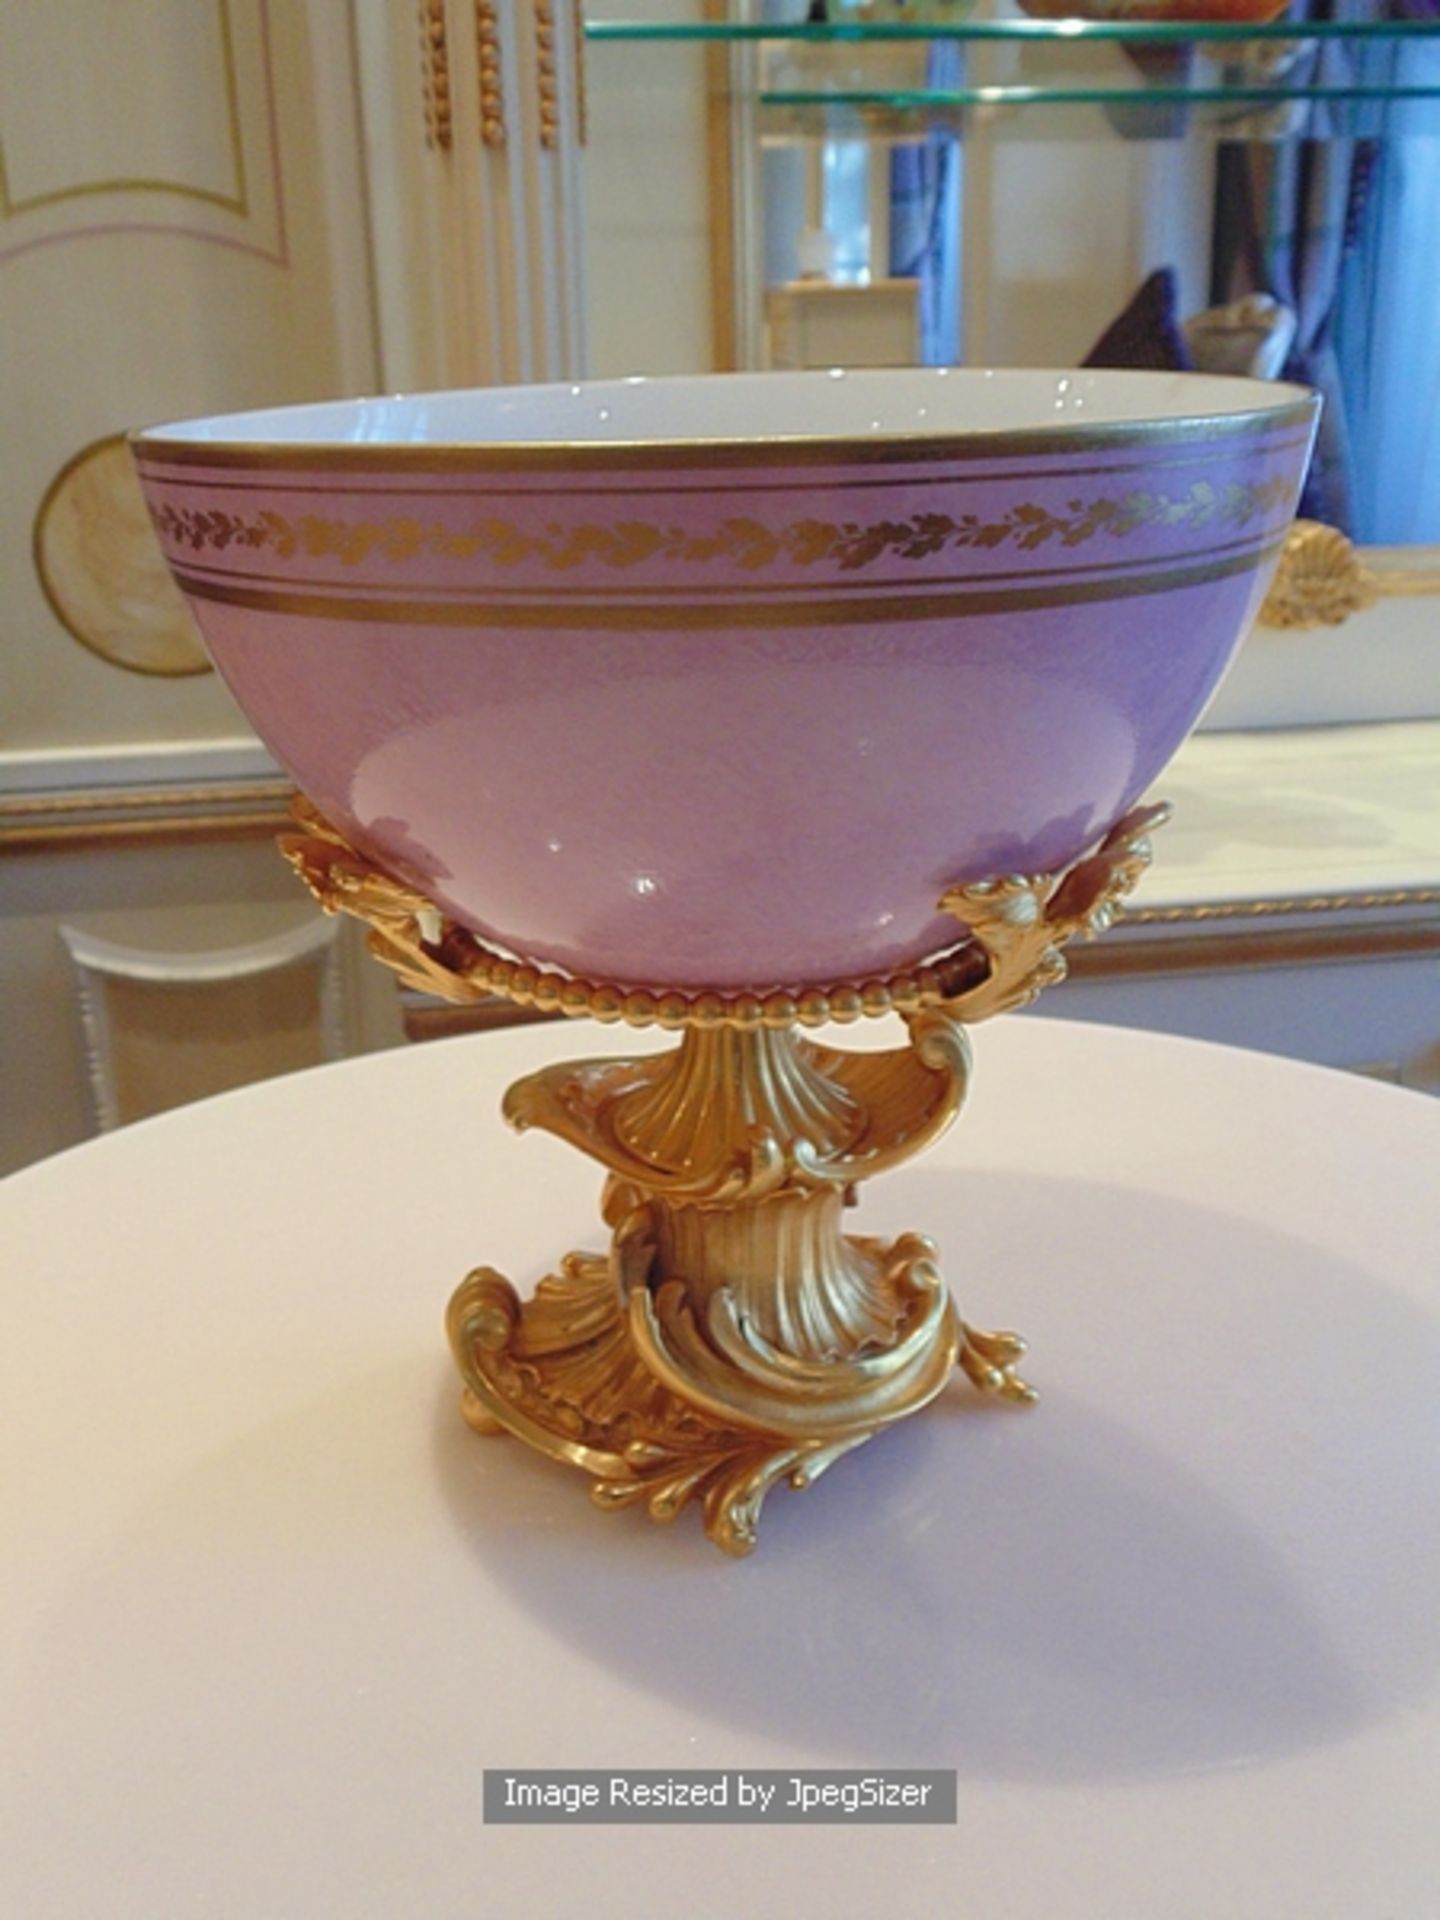 Baldi Home Jewels ceramic 230mm bowl mounted on a Dore bronze with 24ct. gold finish bowl stand